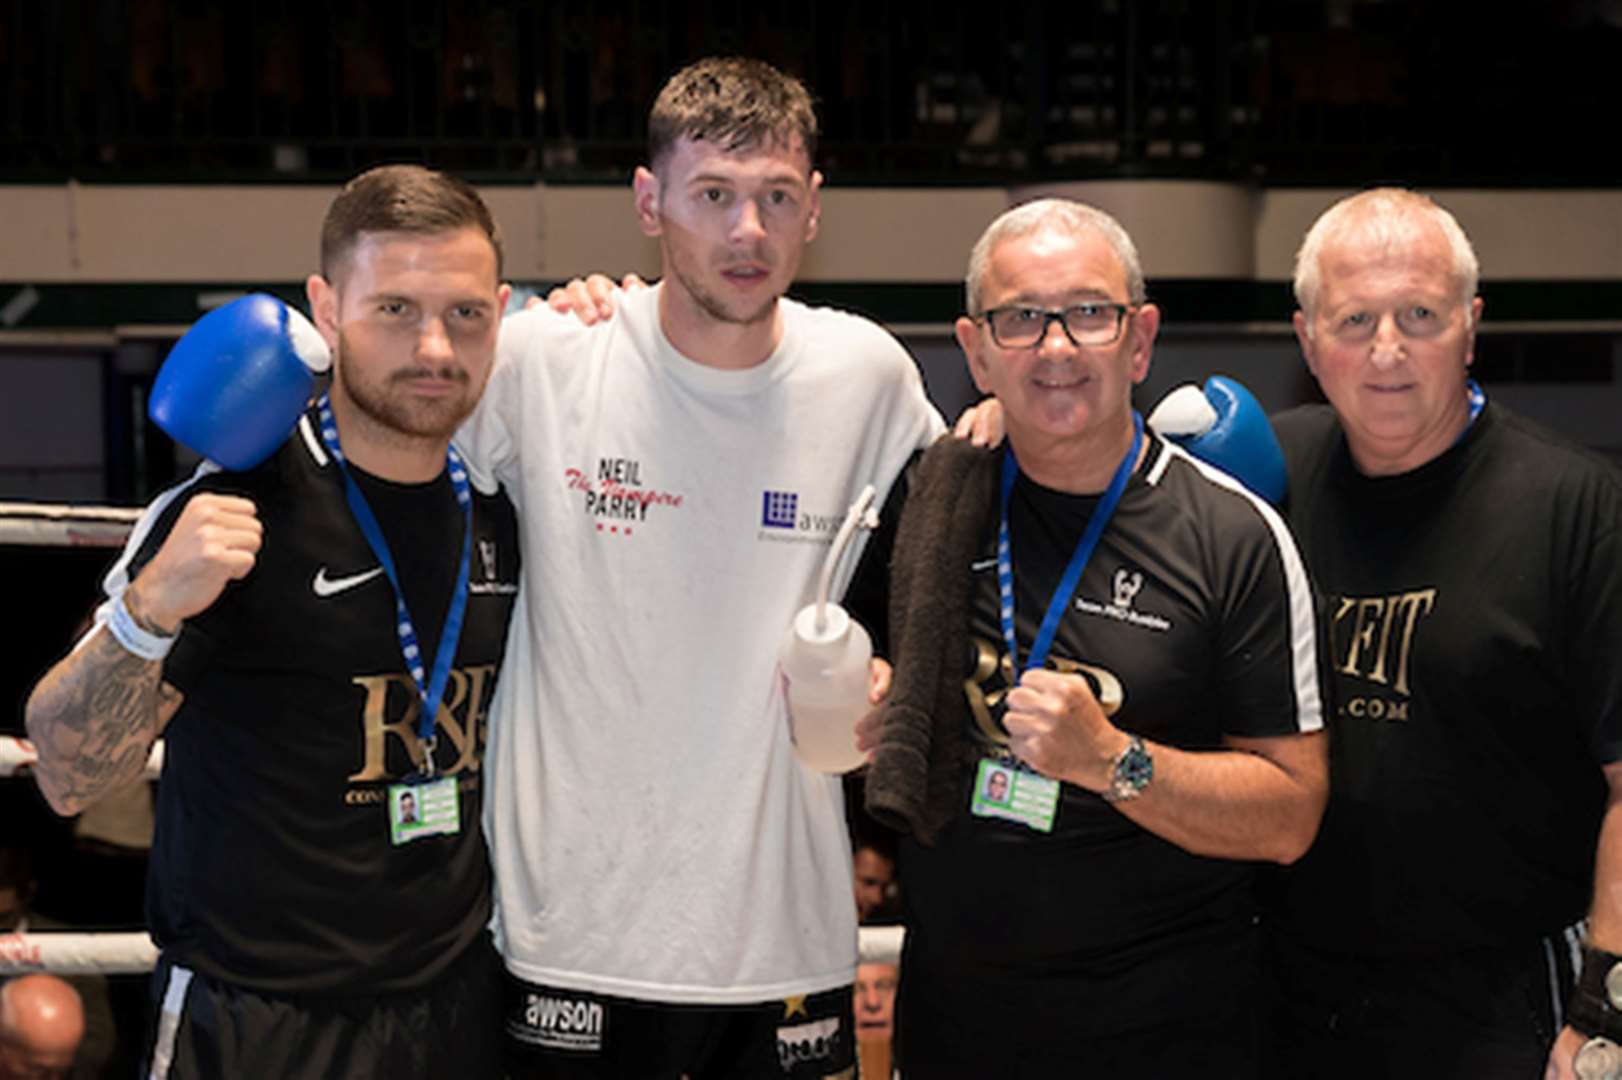 Neil Parry celebrates his win over Teodor Boyadjiev in September 2018. Goodwin Boxing